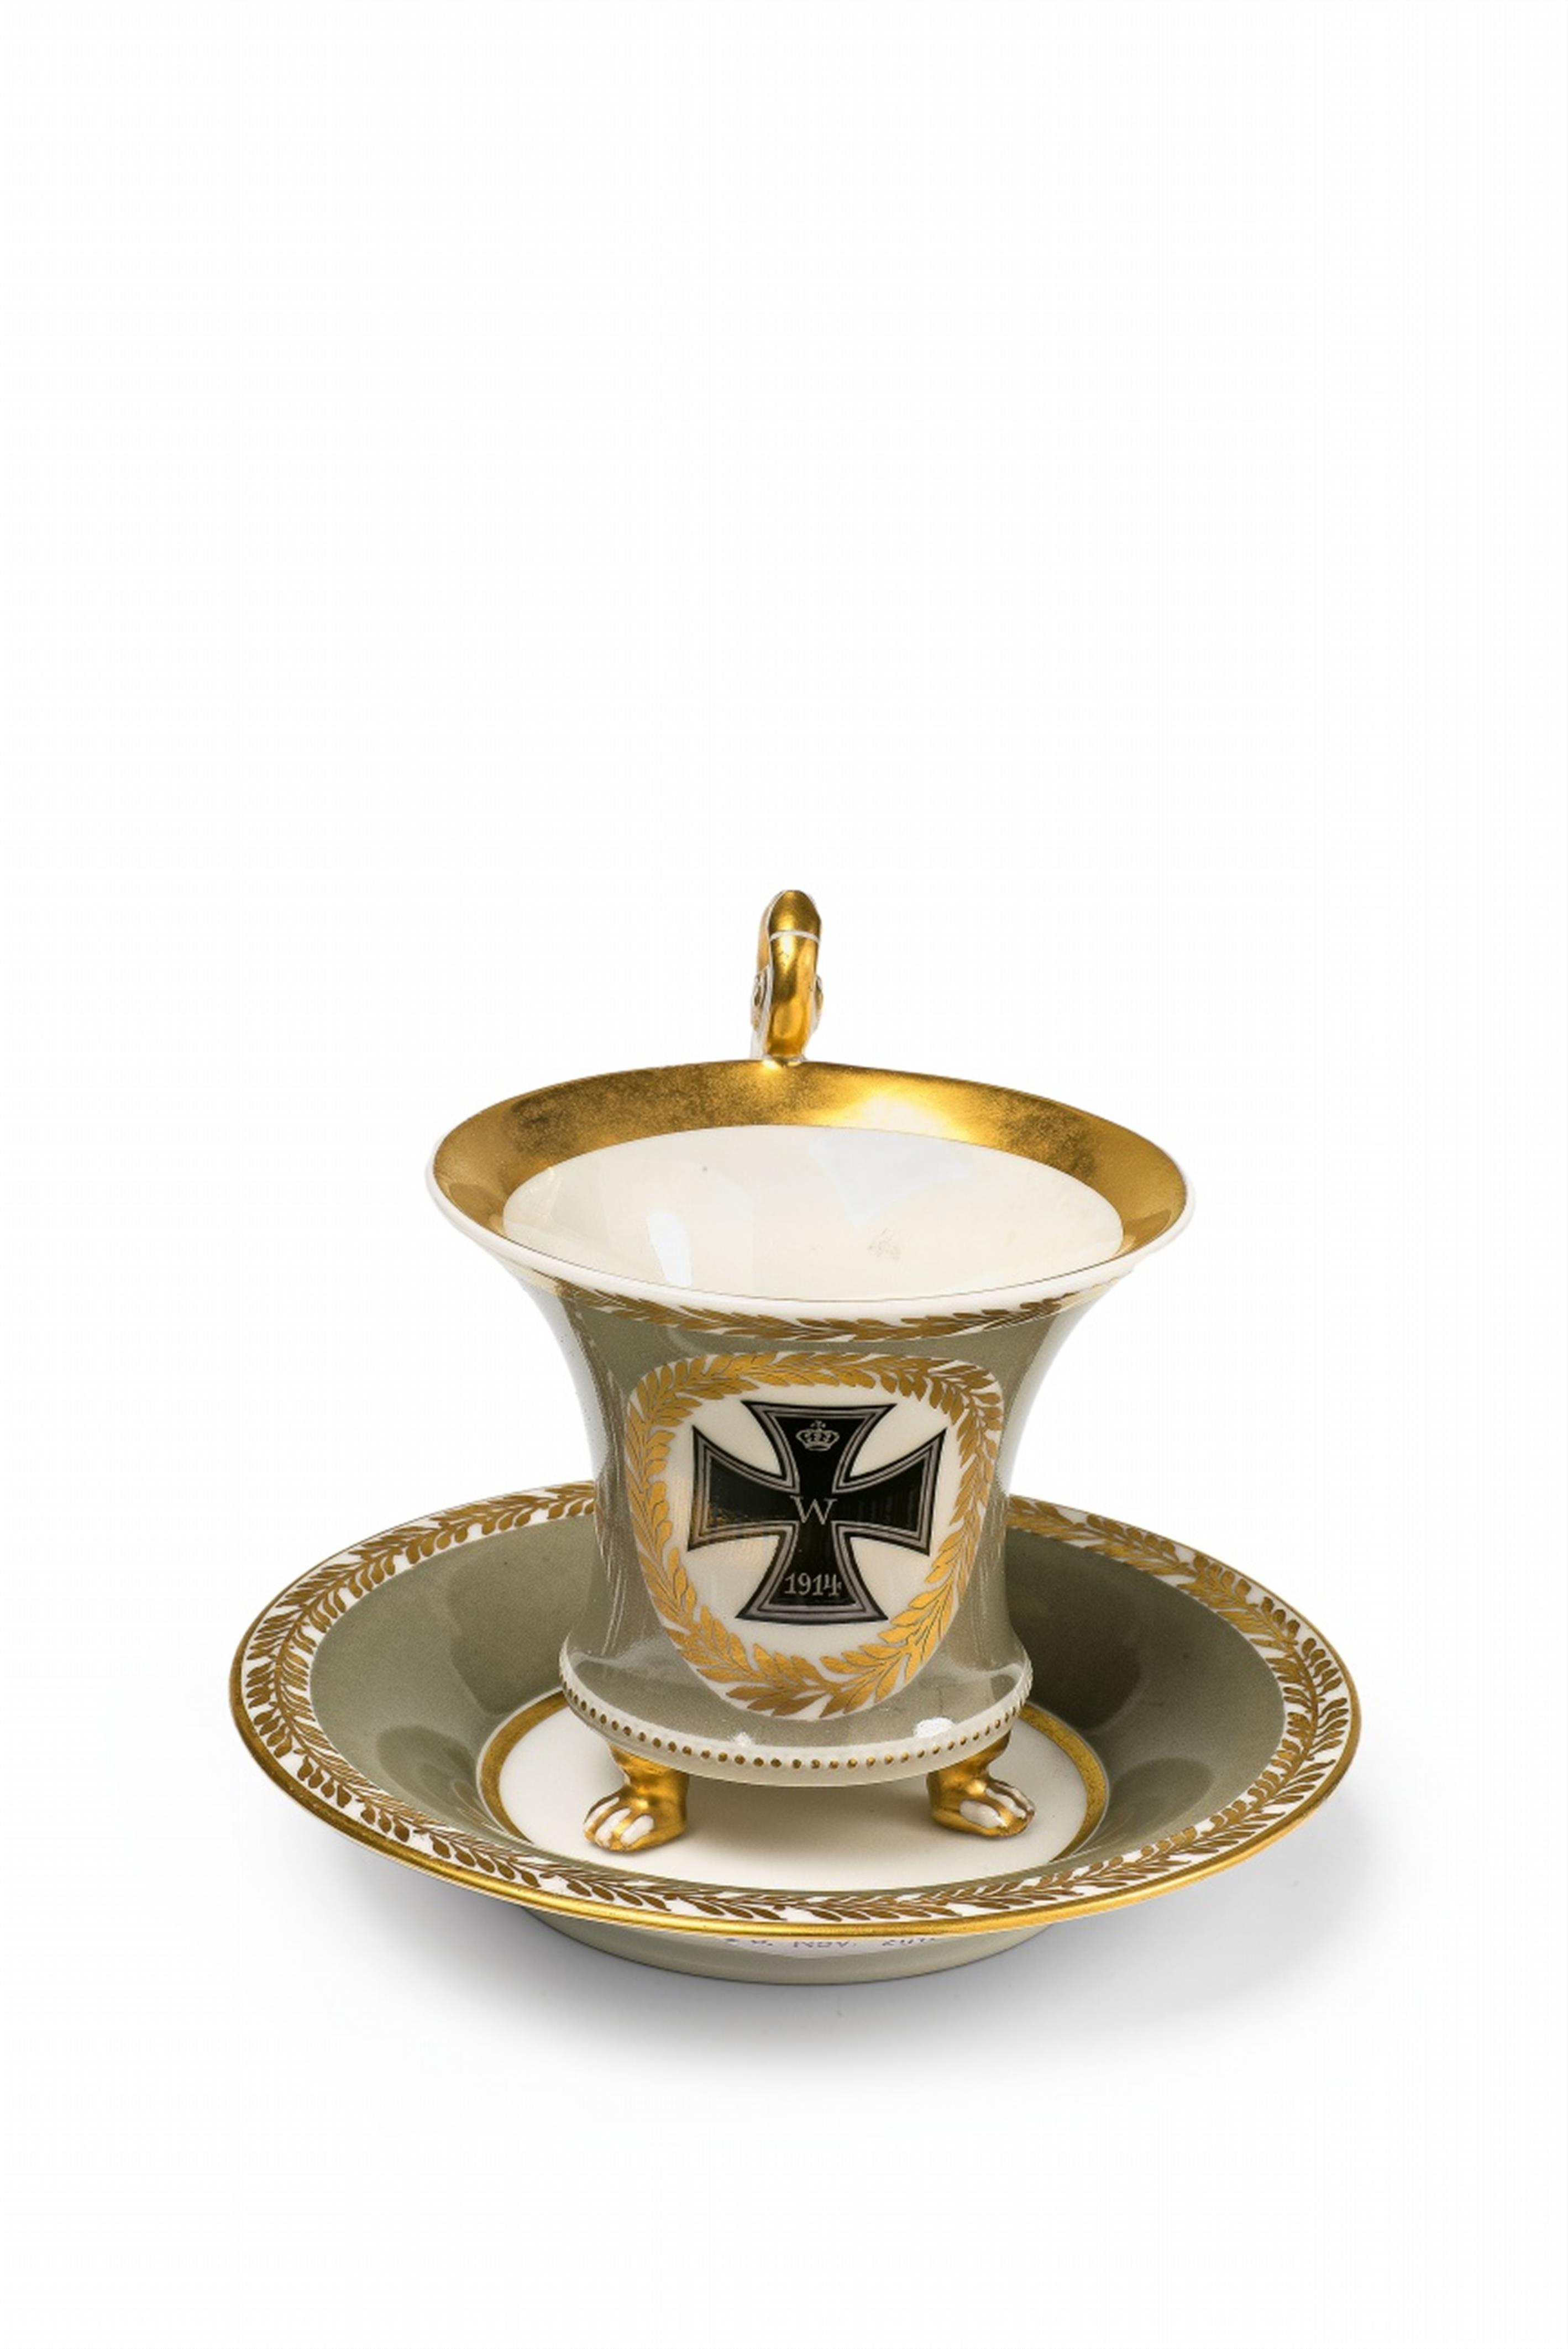 A Berlin KPM porcelain cup and saucer with the Iron Cross - image-1